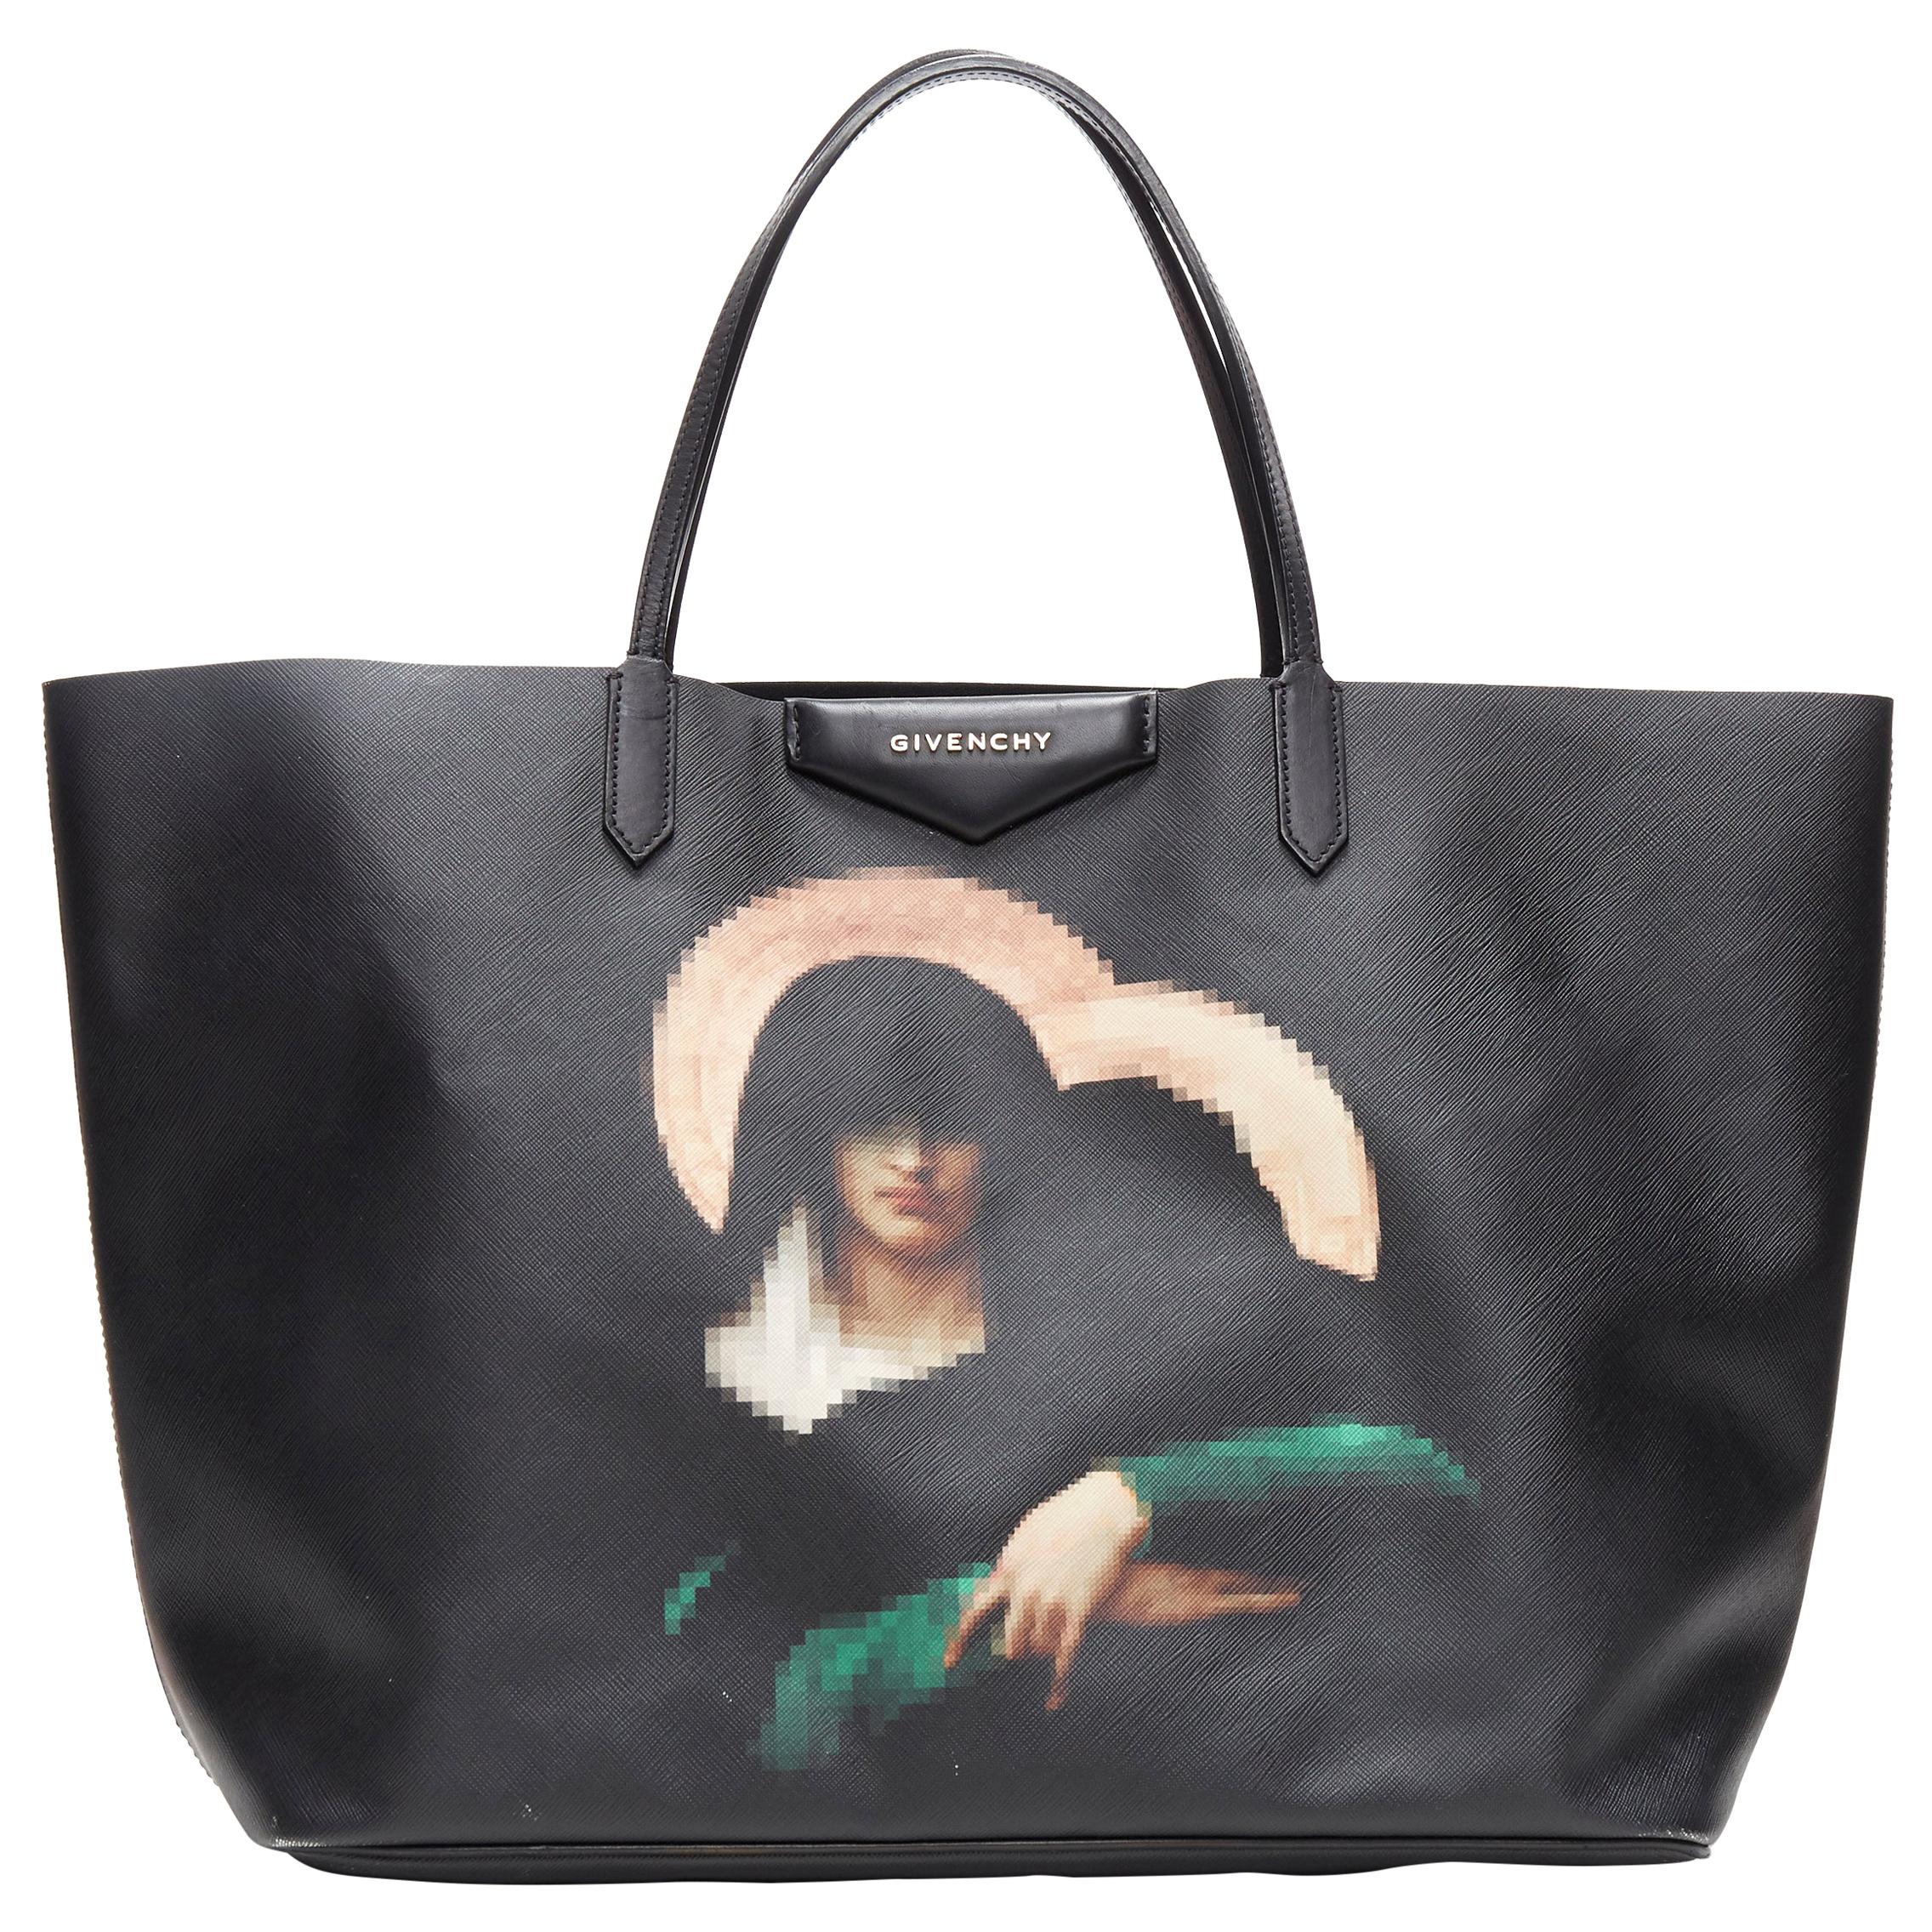 GIVENCHY TISCI Madonna pixelated print black saffiano leather large tote bag